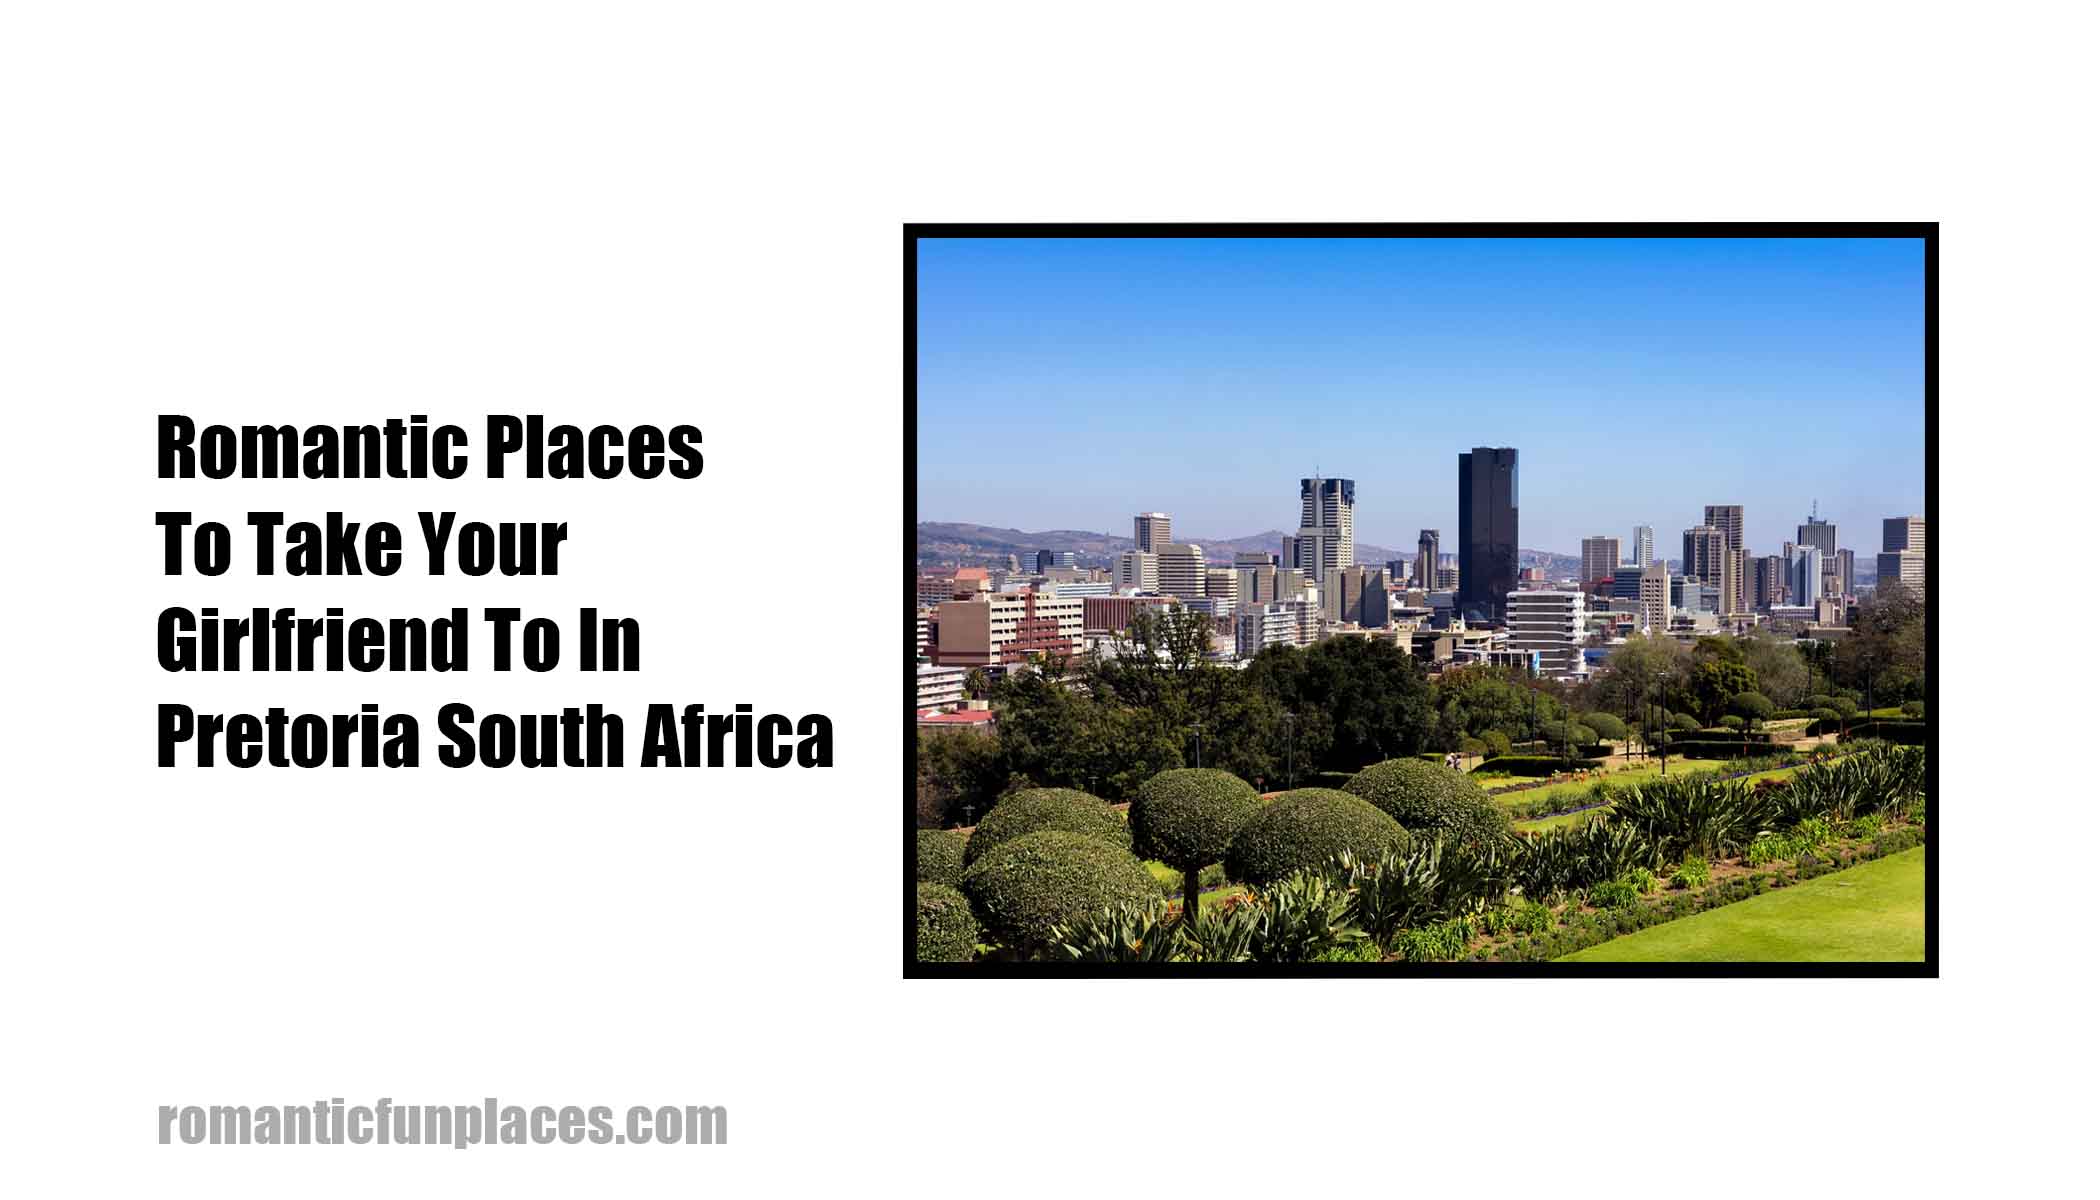 Romantic Places To Take Your Girlfriend To In Pretoria South Africa 